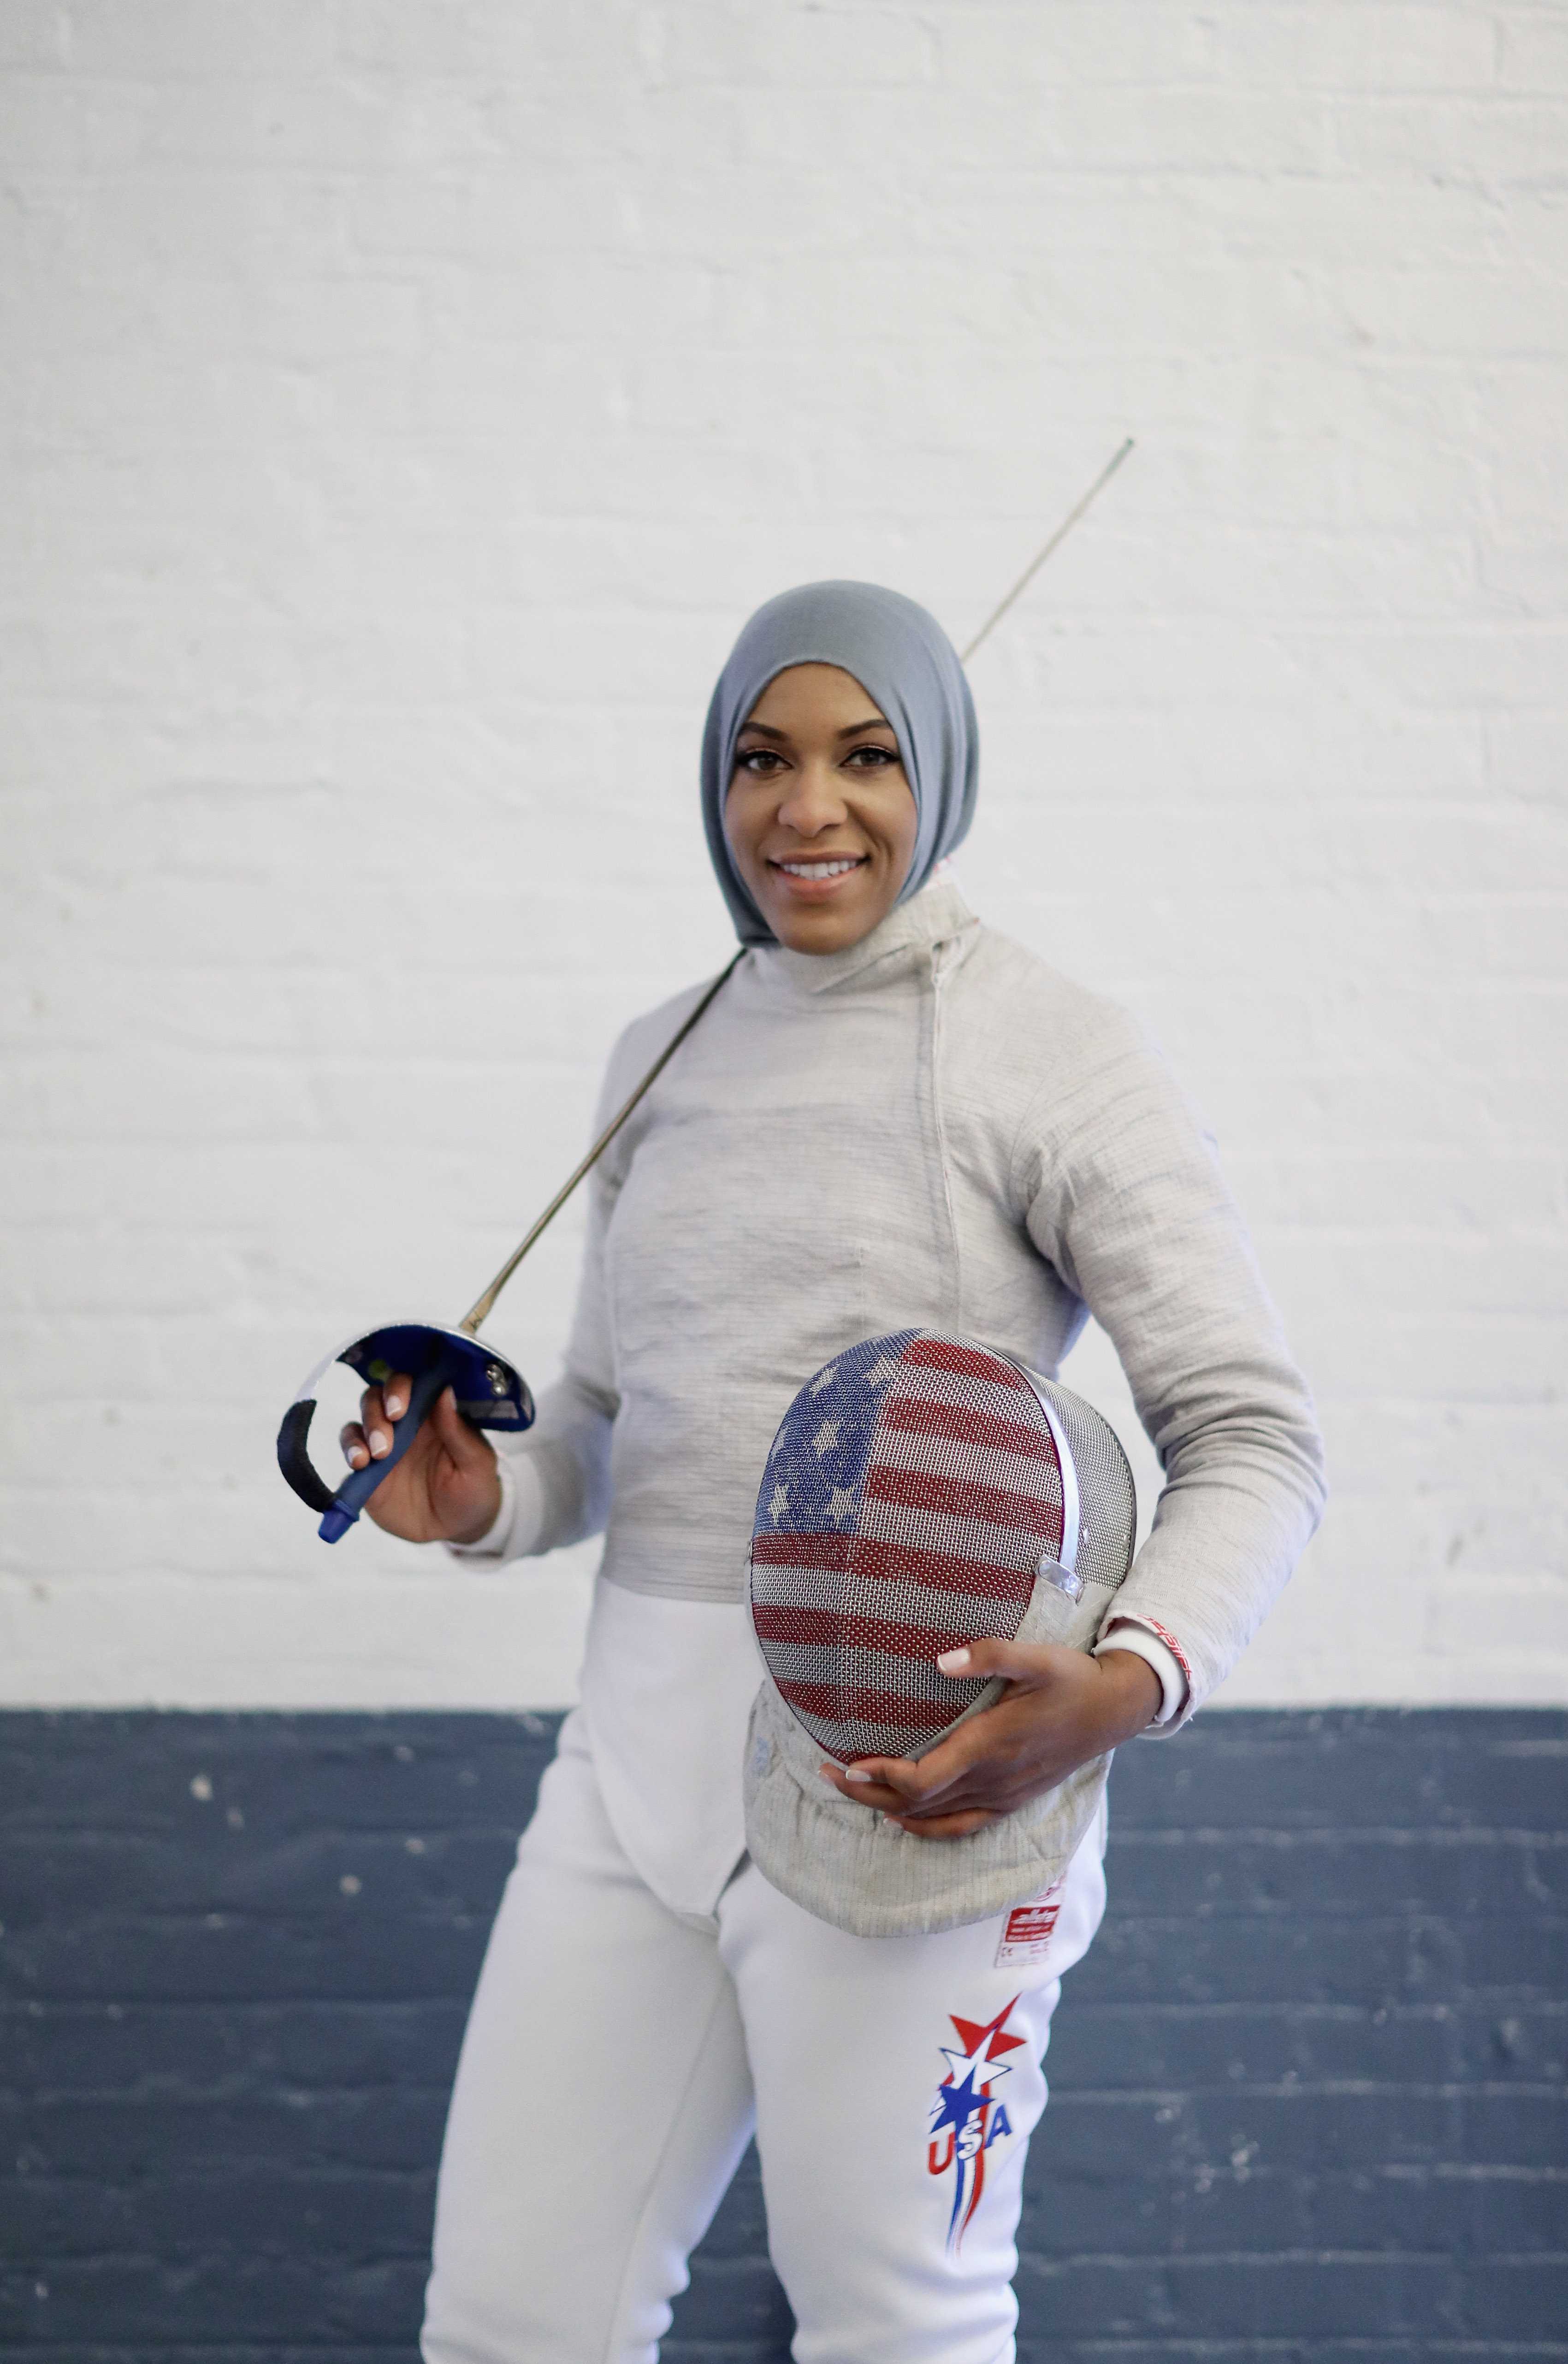 Color photograph of woman in fencing uniform